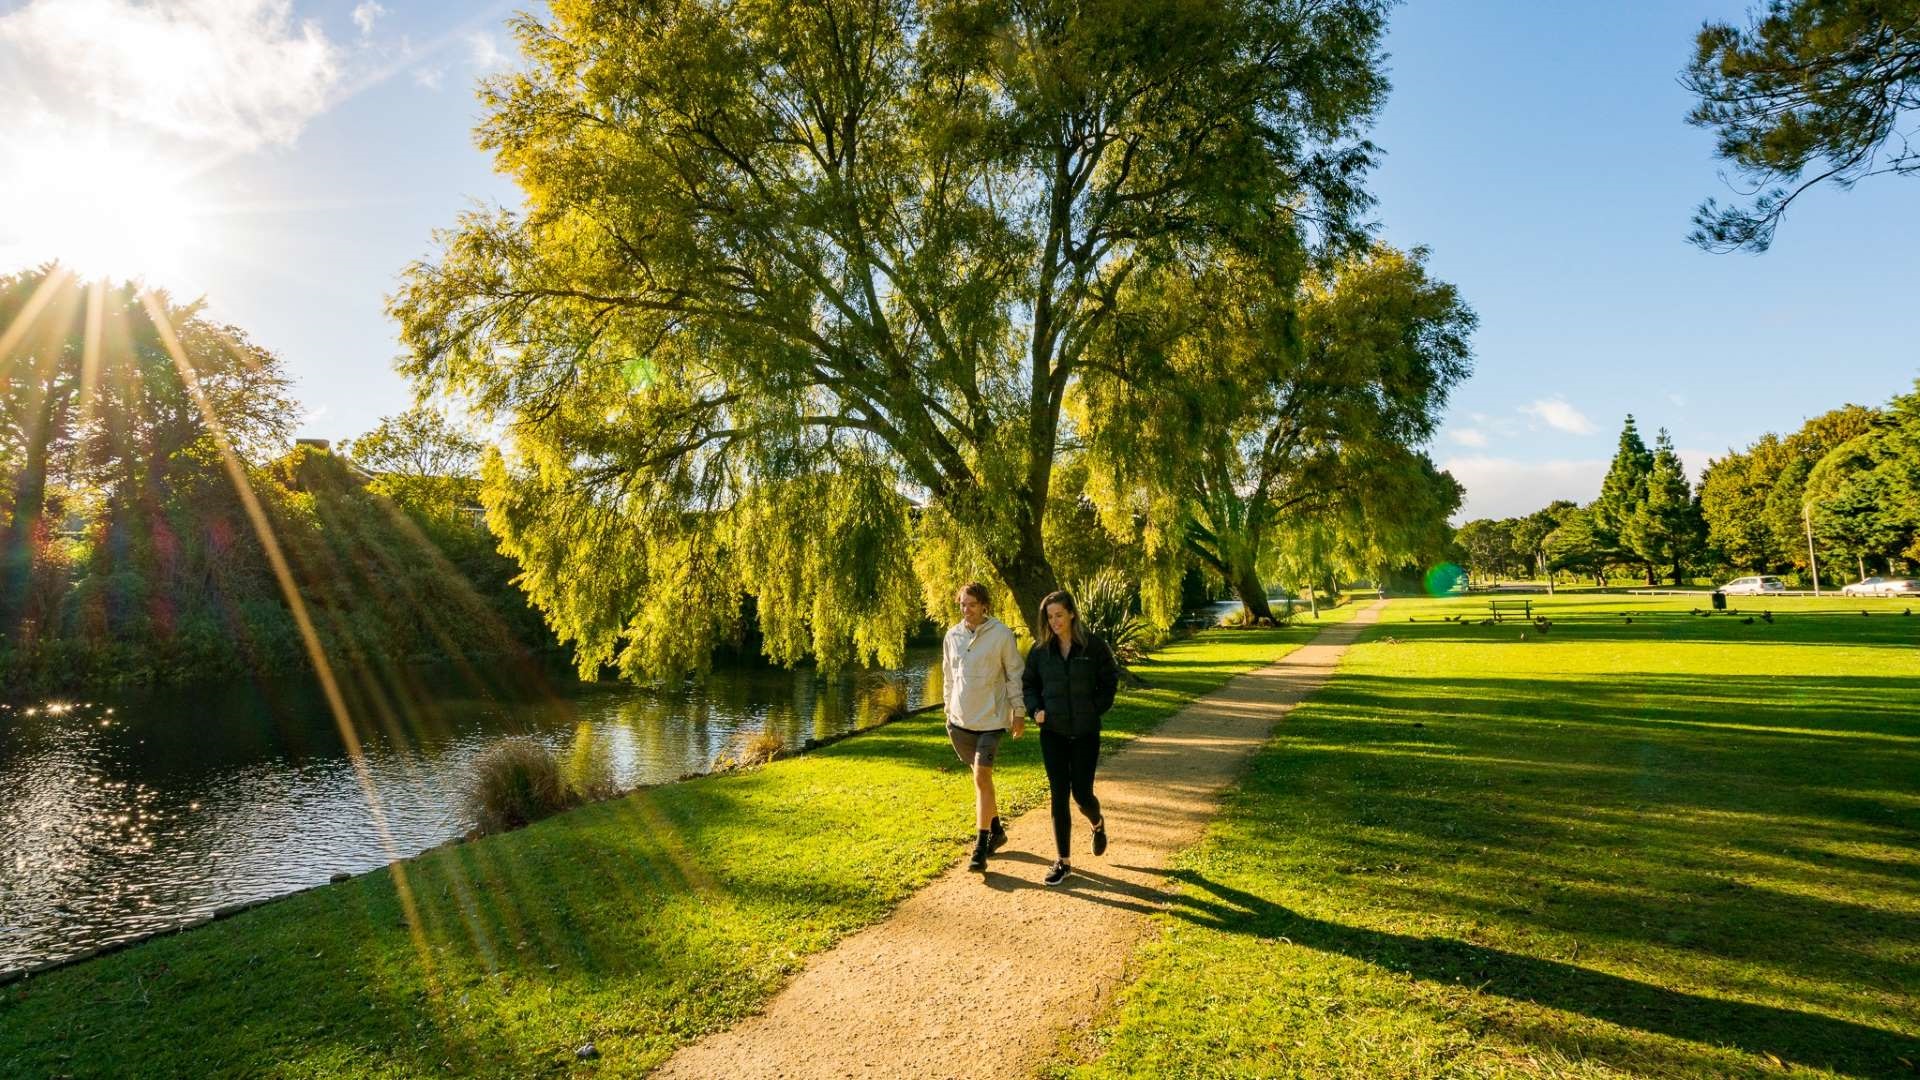 Photo shows couple walking along limestone pathway with lagoon on one side and grassy reserve full of trees on the other.